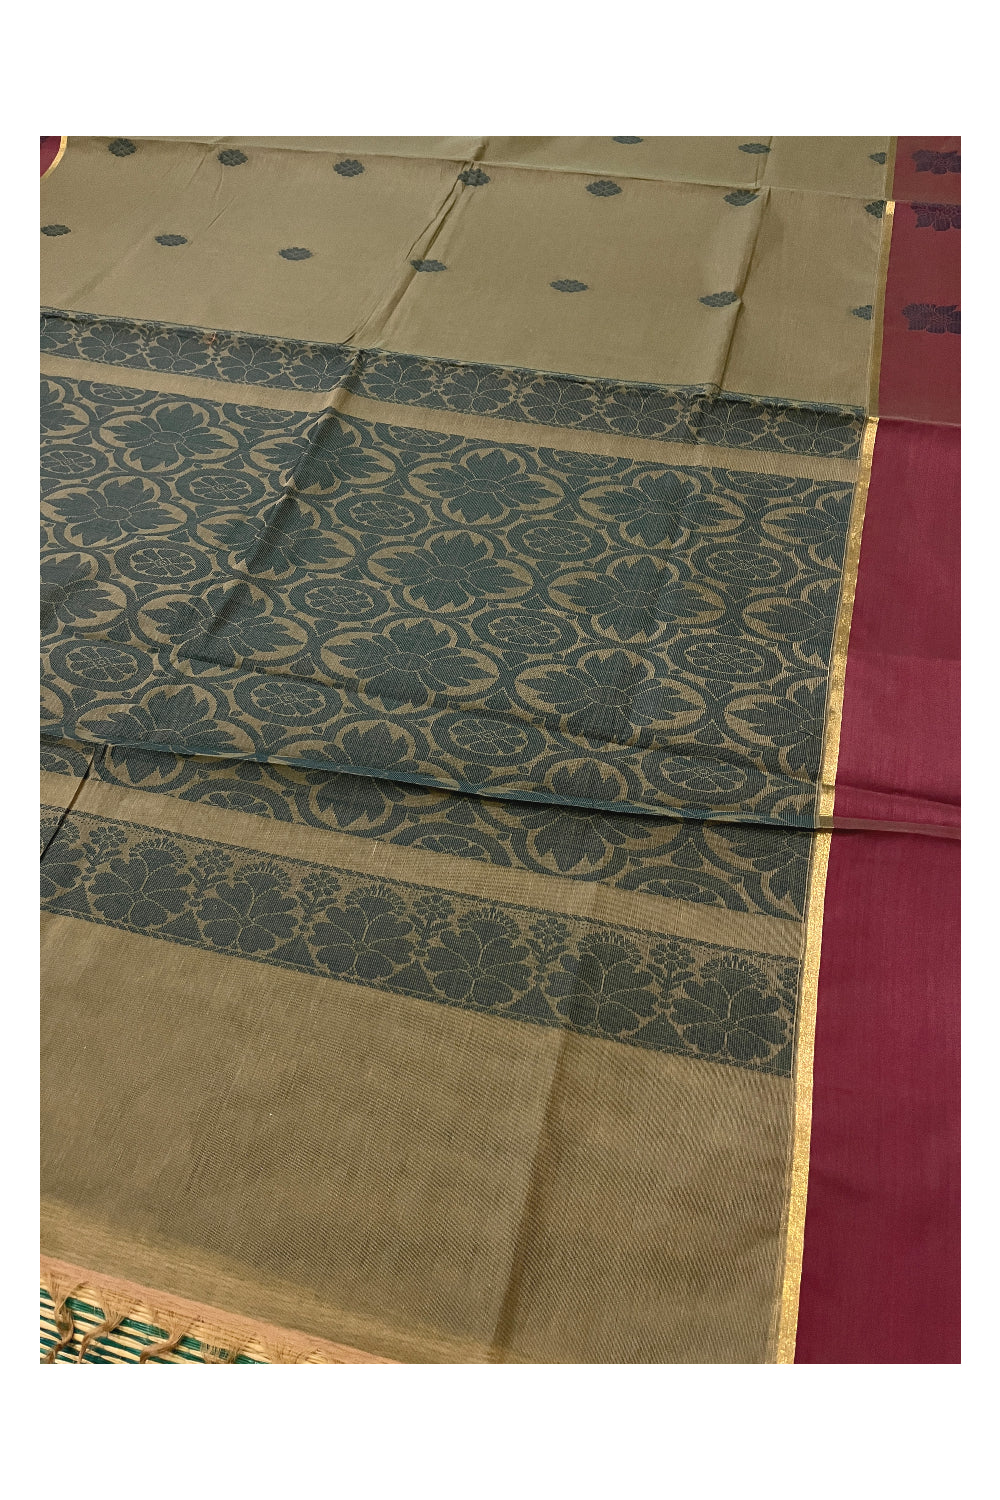 Southloom Cotton Brown Saree with Maroon Floral Woven Border